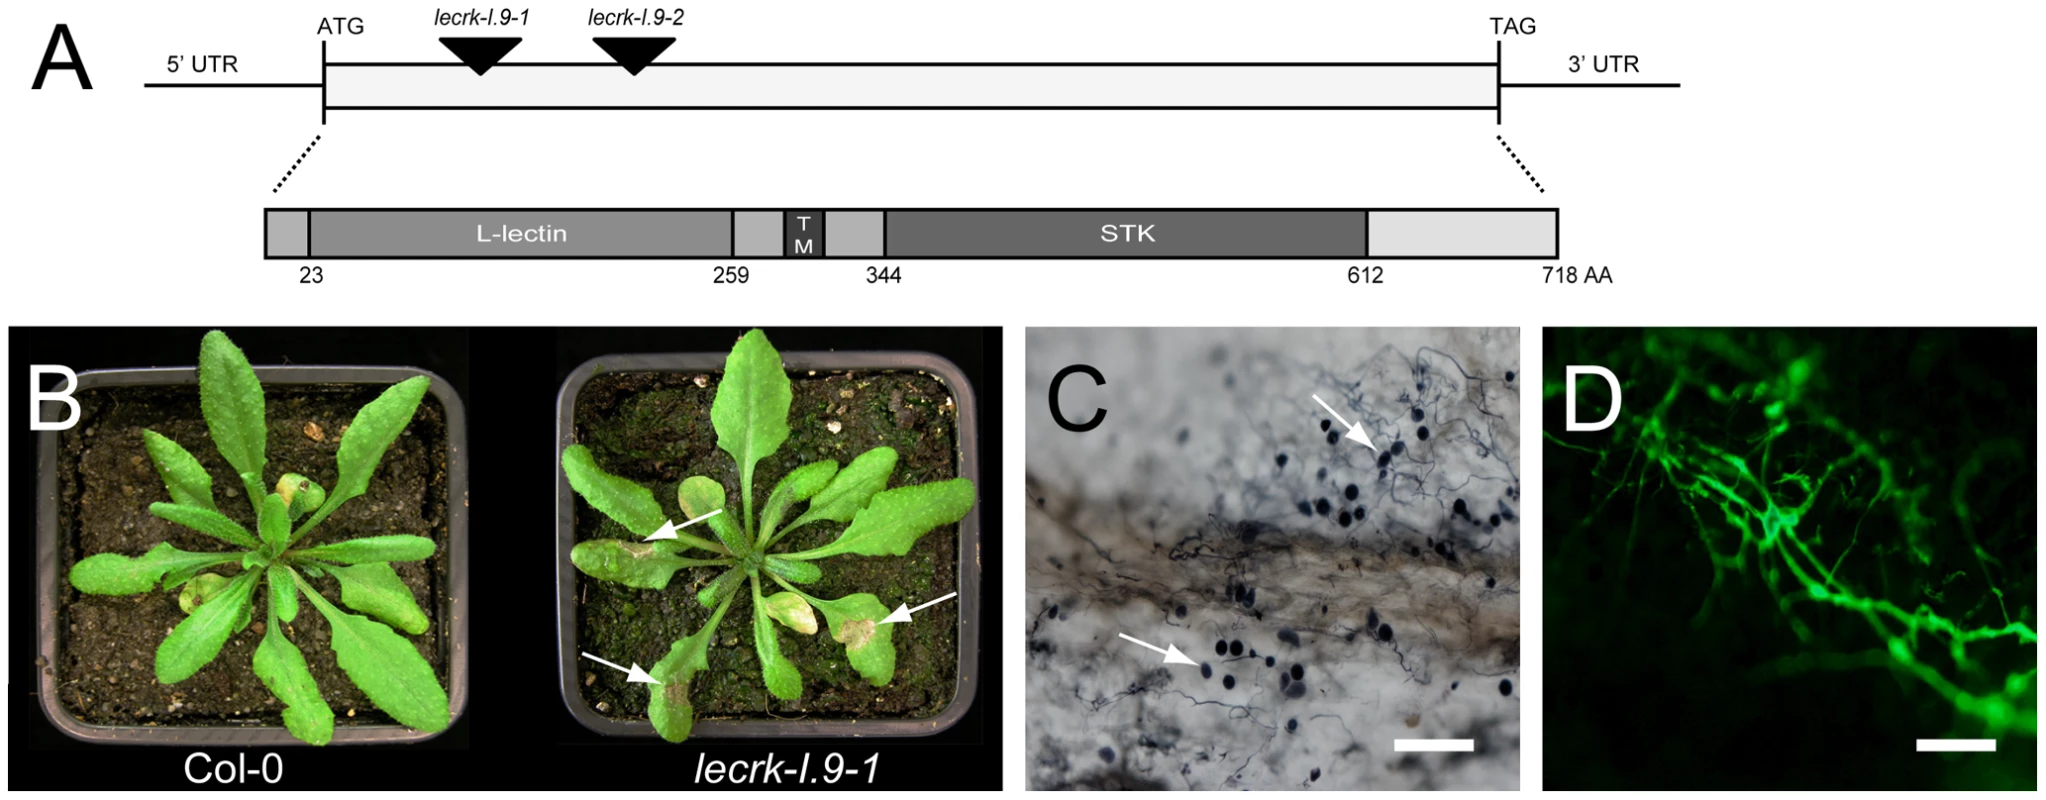 Arabidopsis mutants disrupted in <i>LecRK-I.9</i> are impaired in resistance to <i>P. brassicae</i>.